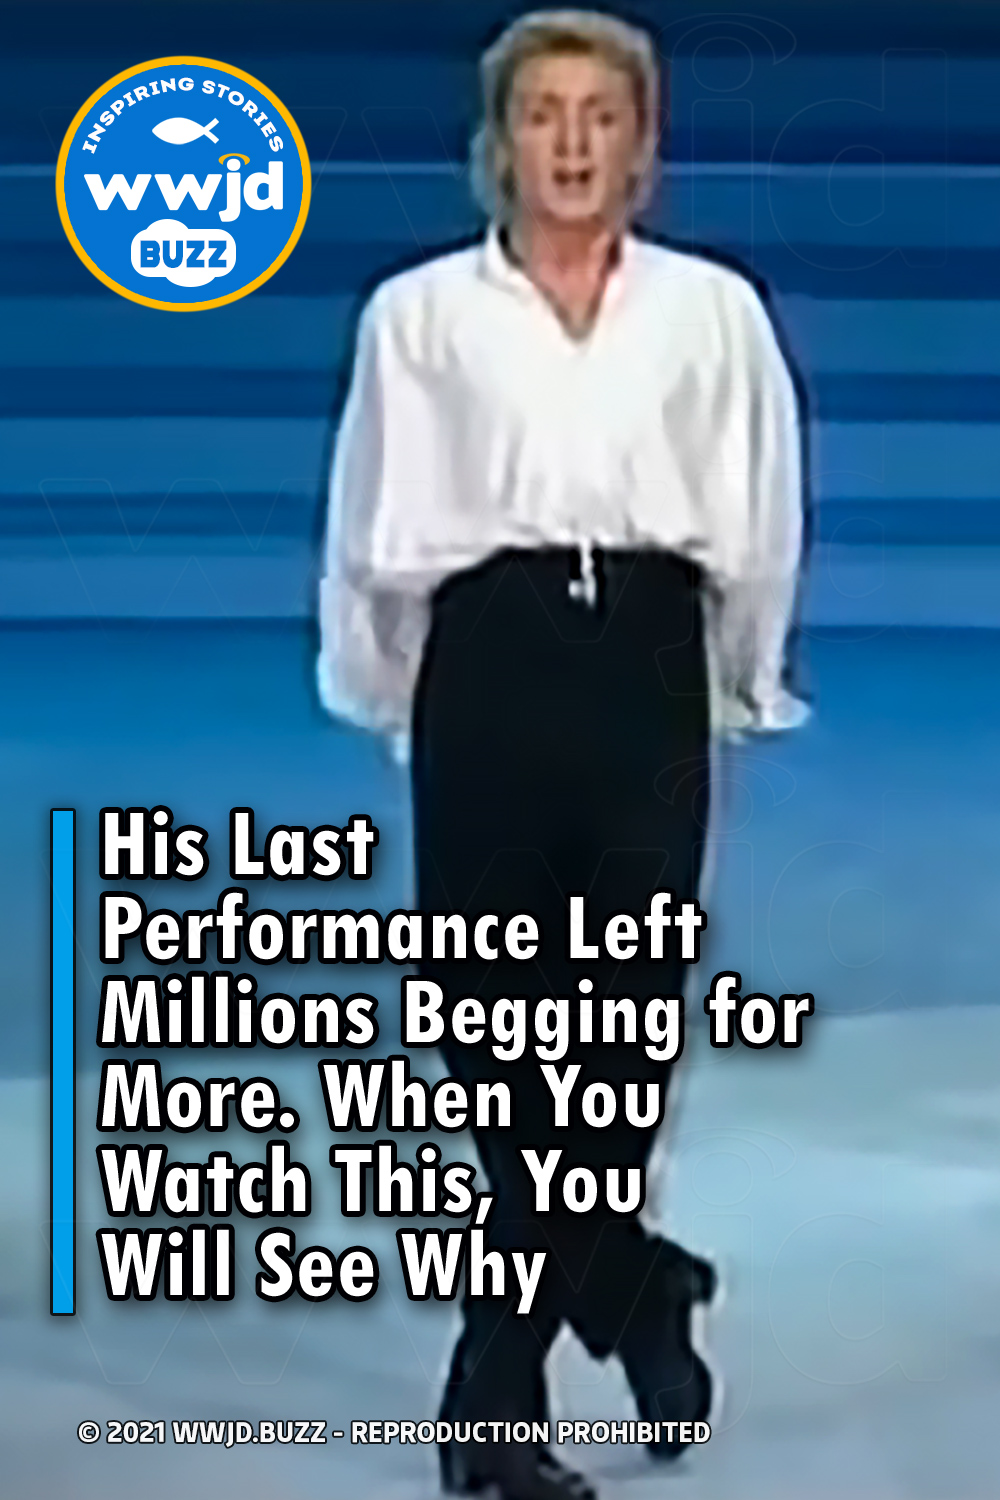 His Last Performance Left Millions Begging for More. When You Watch This, You Will See Why